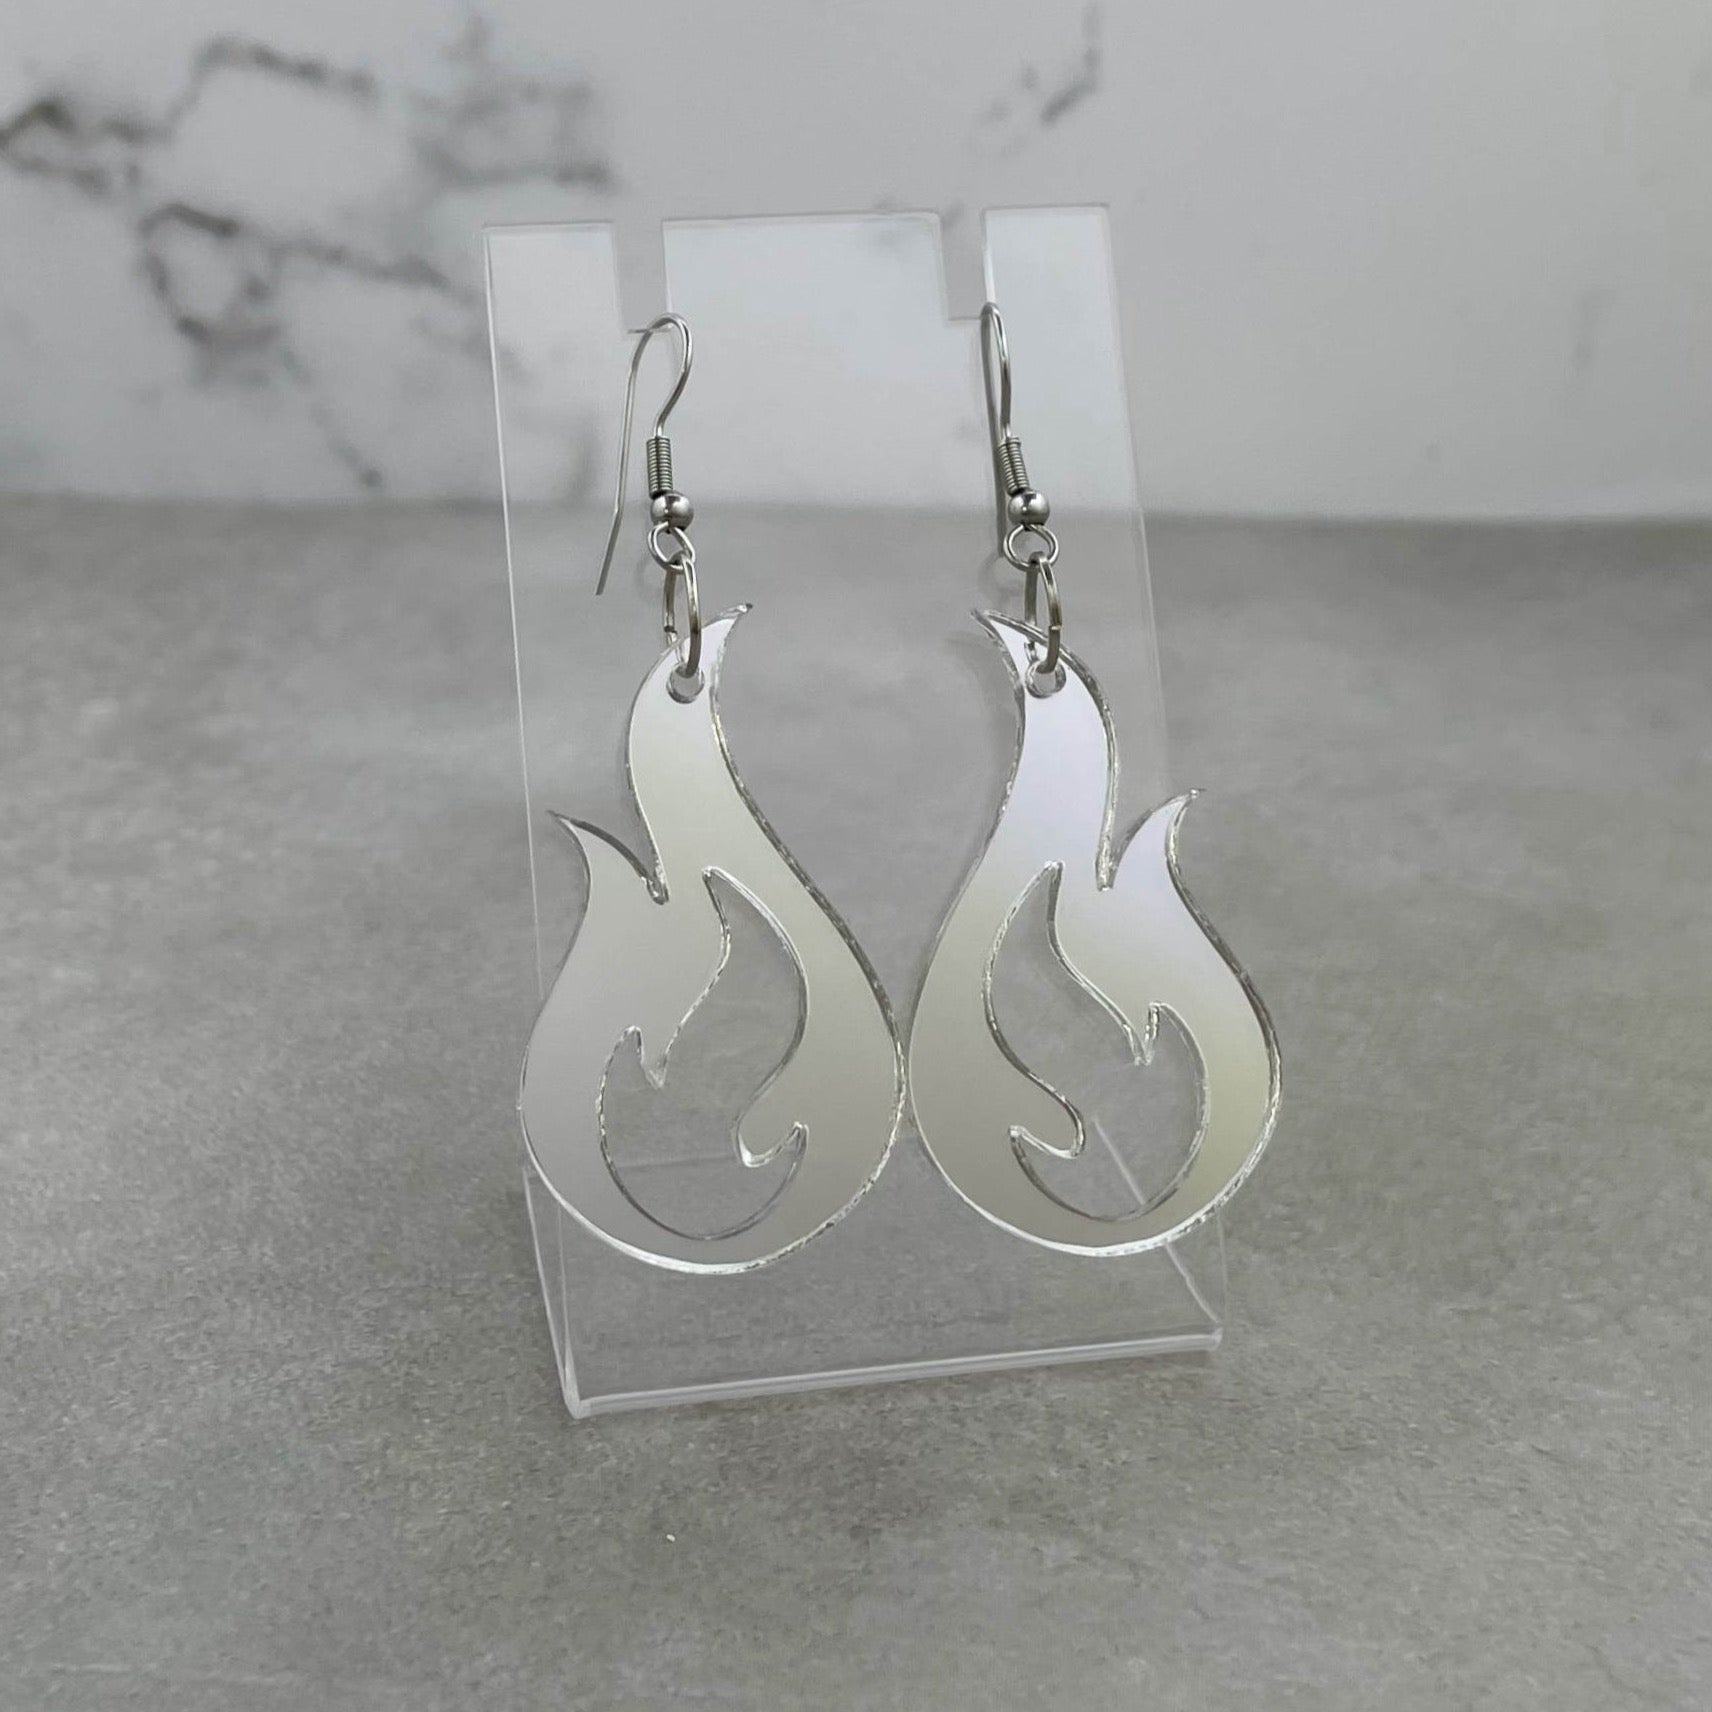 Flame Essential Earrings (4 colours available) - Lost Minds Clothing